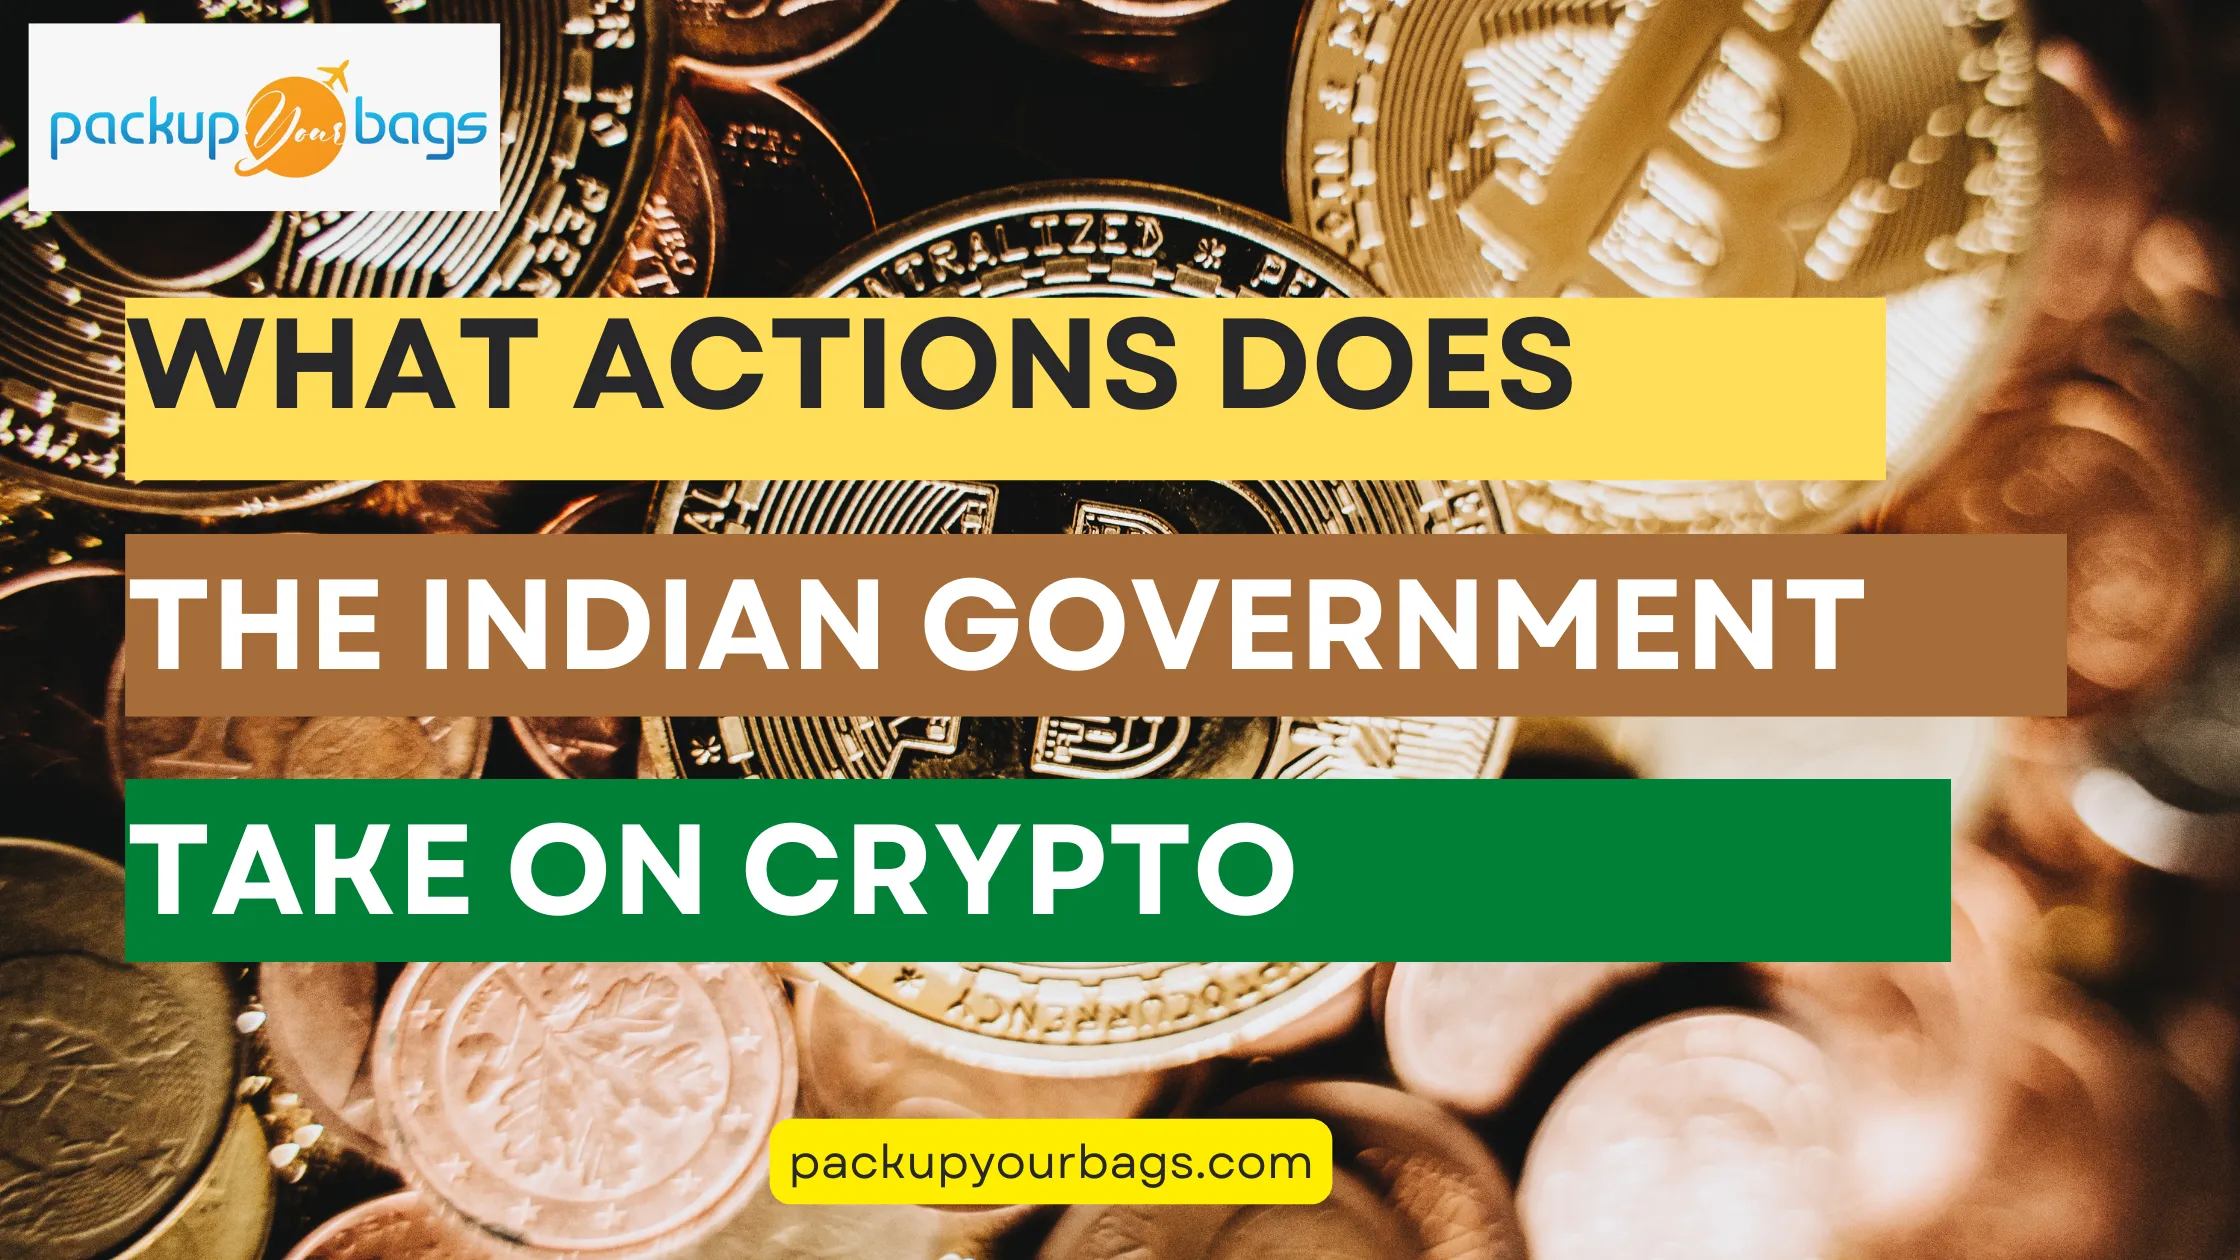 What actions does the Indian government take on crypto